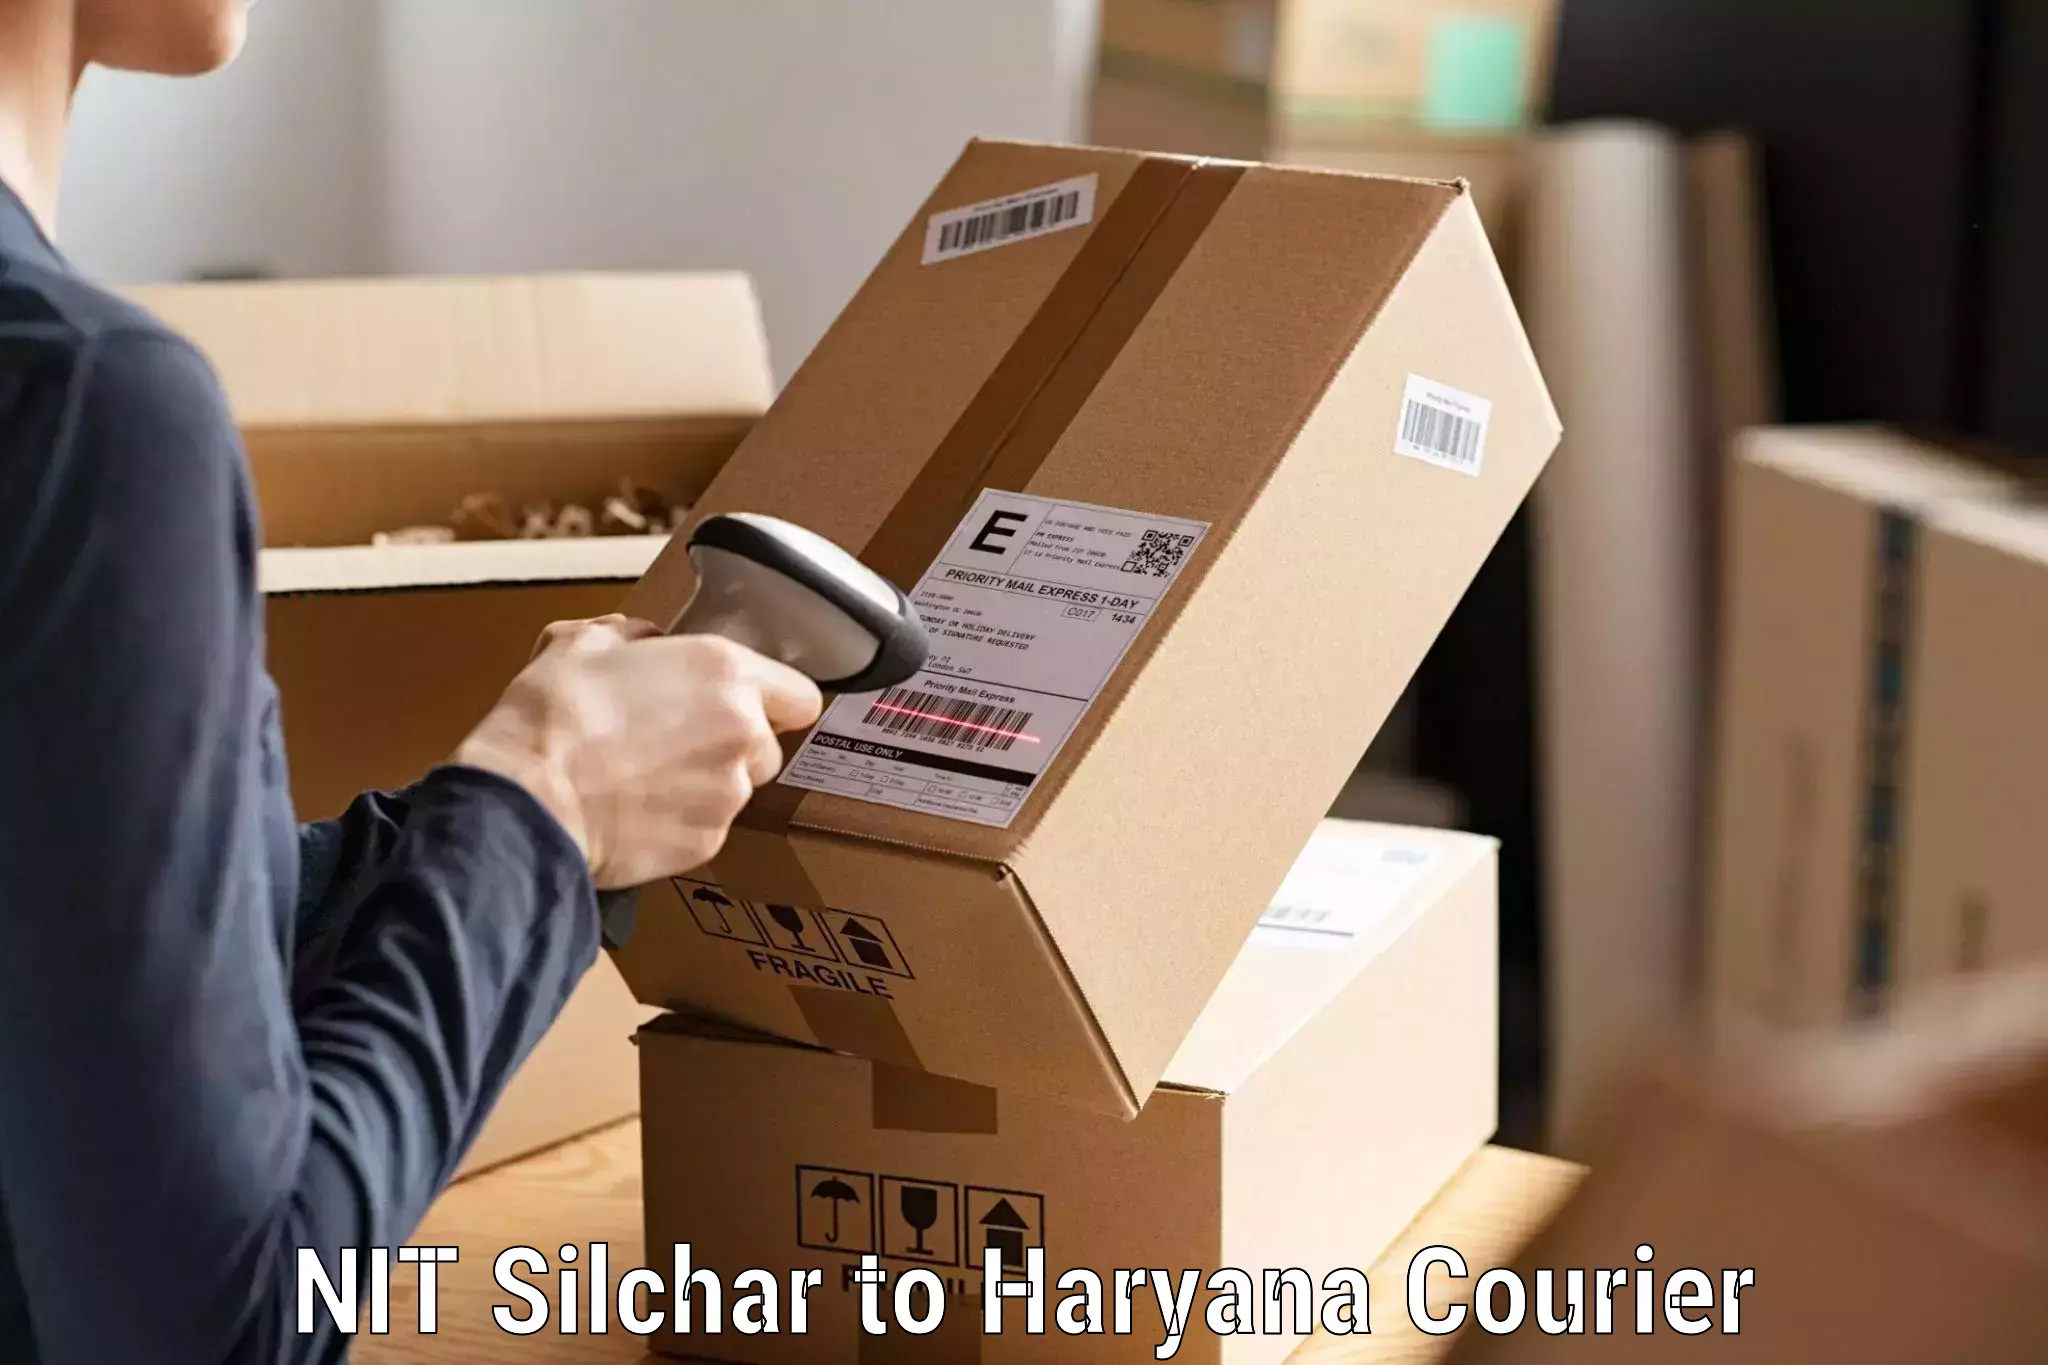 Easy access courier services NIT Silchar to Pataudi